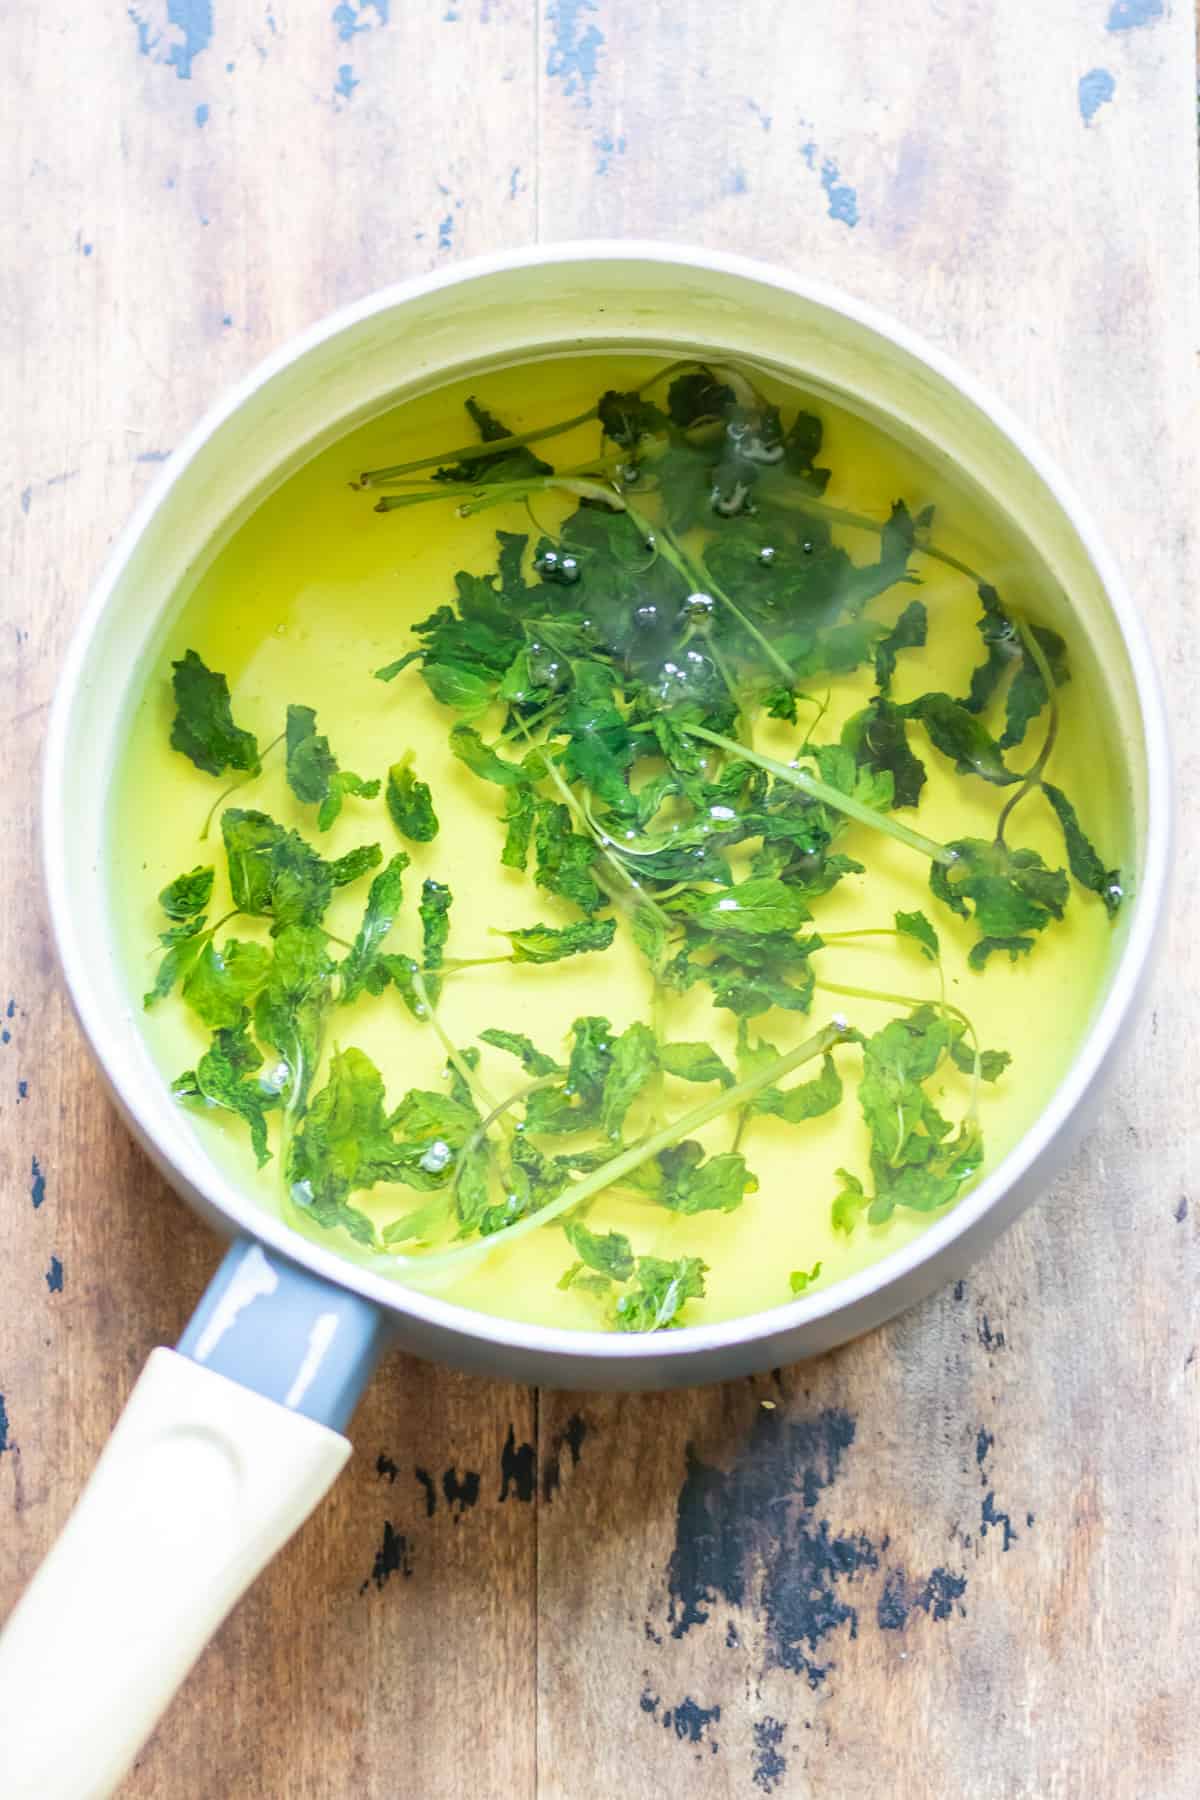 Syrup in a pan with mint leaves.